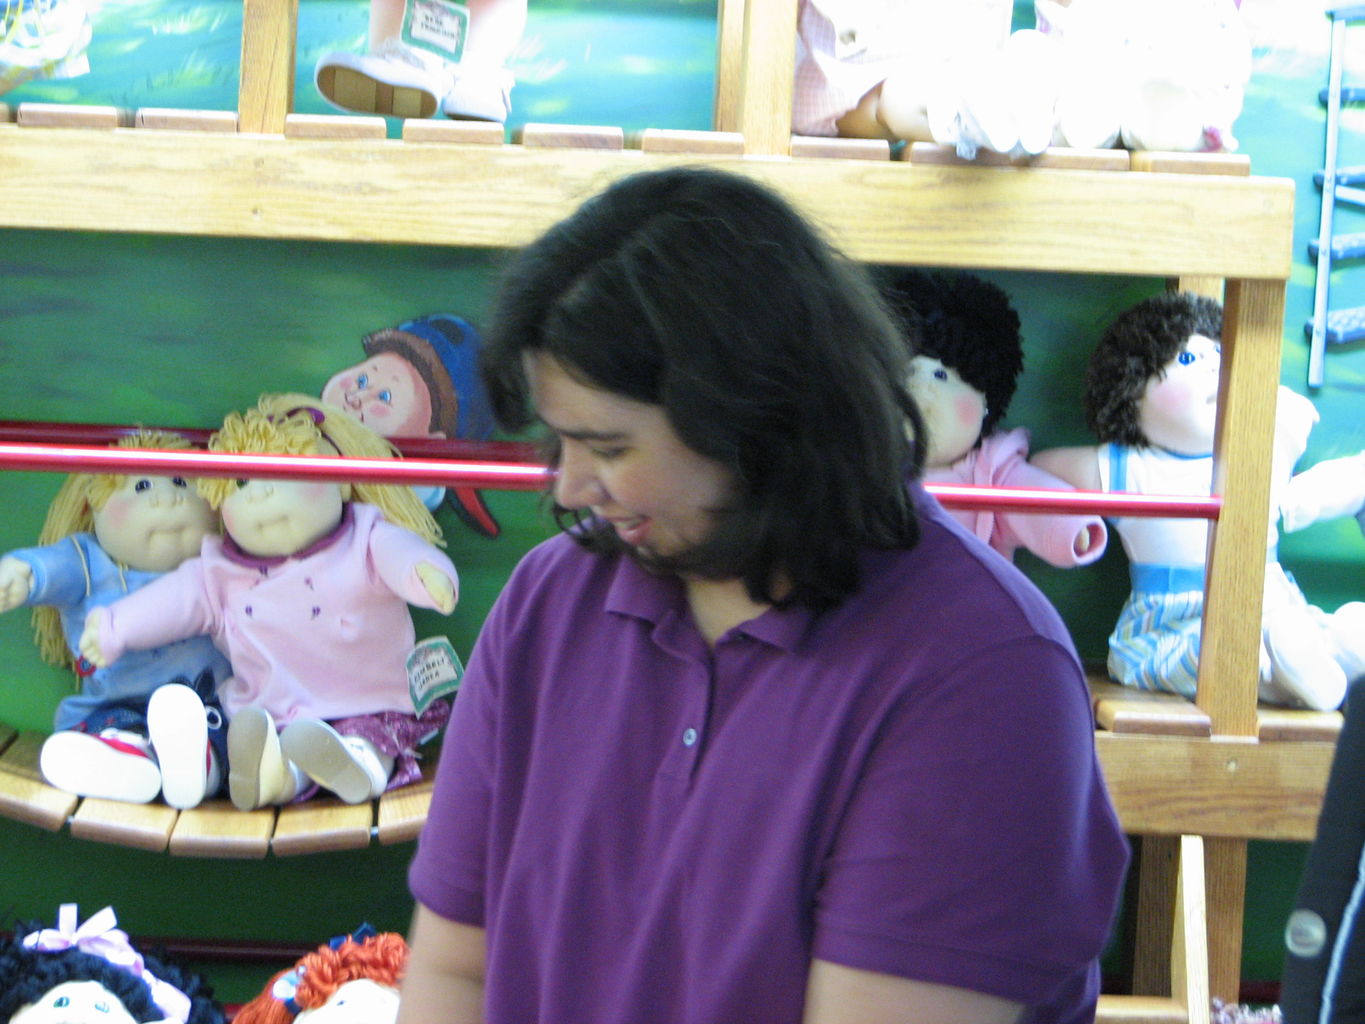 Trip to Cabbage Patch Babyland
